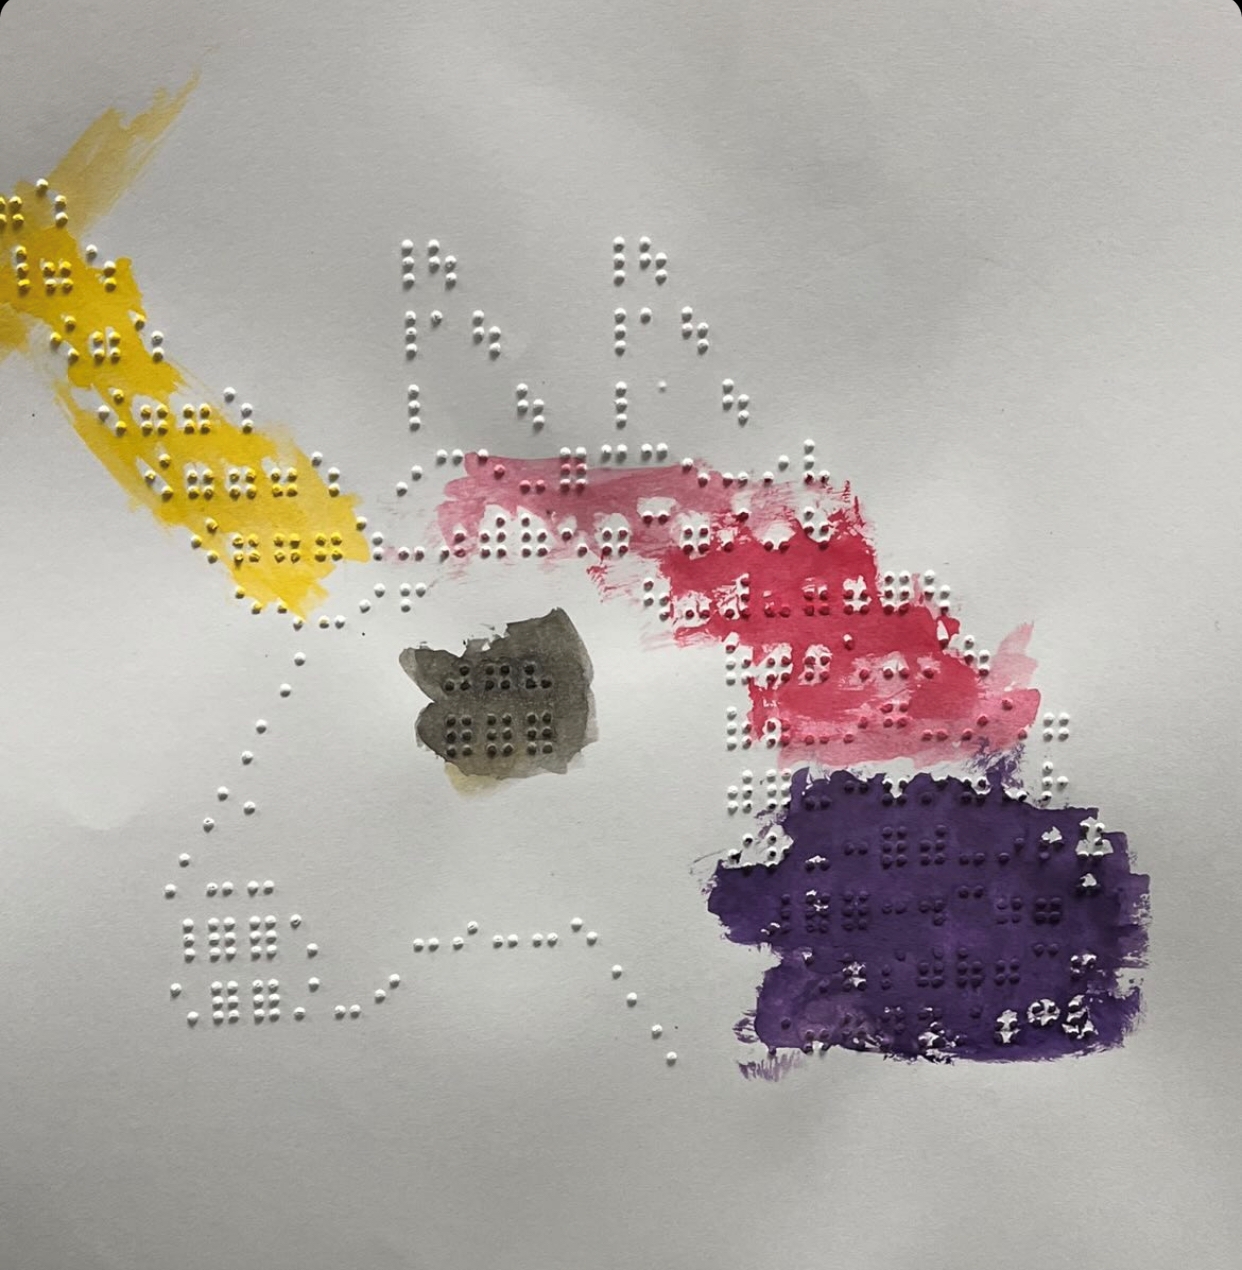 Unicorn braille design with watercolors painted on it